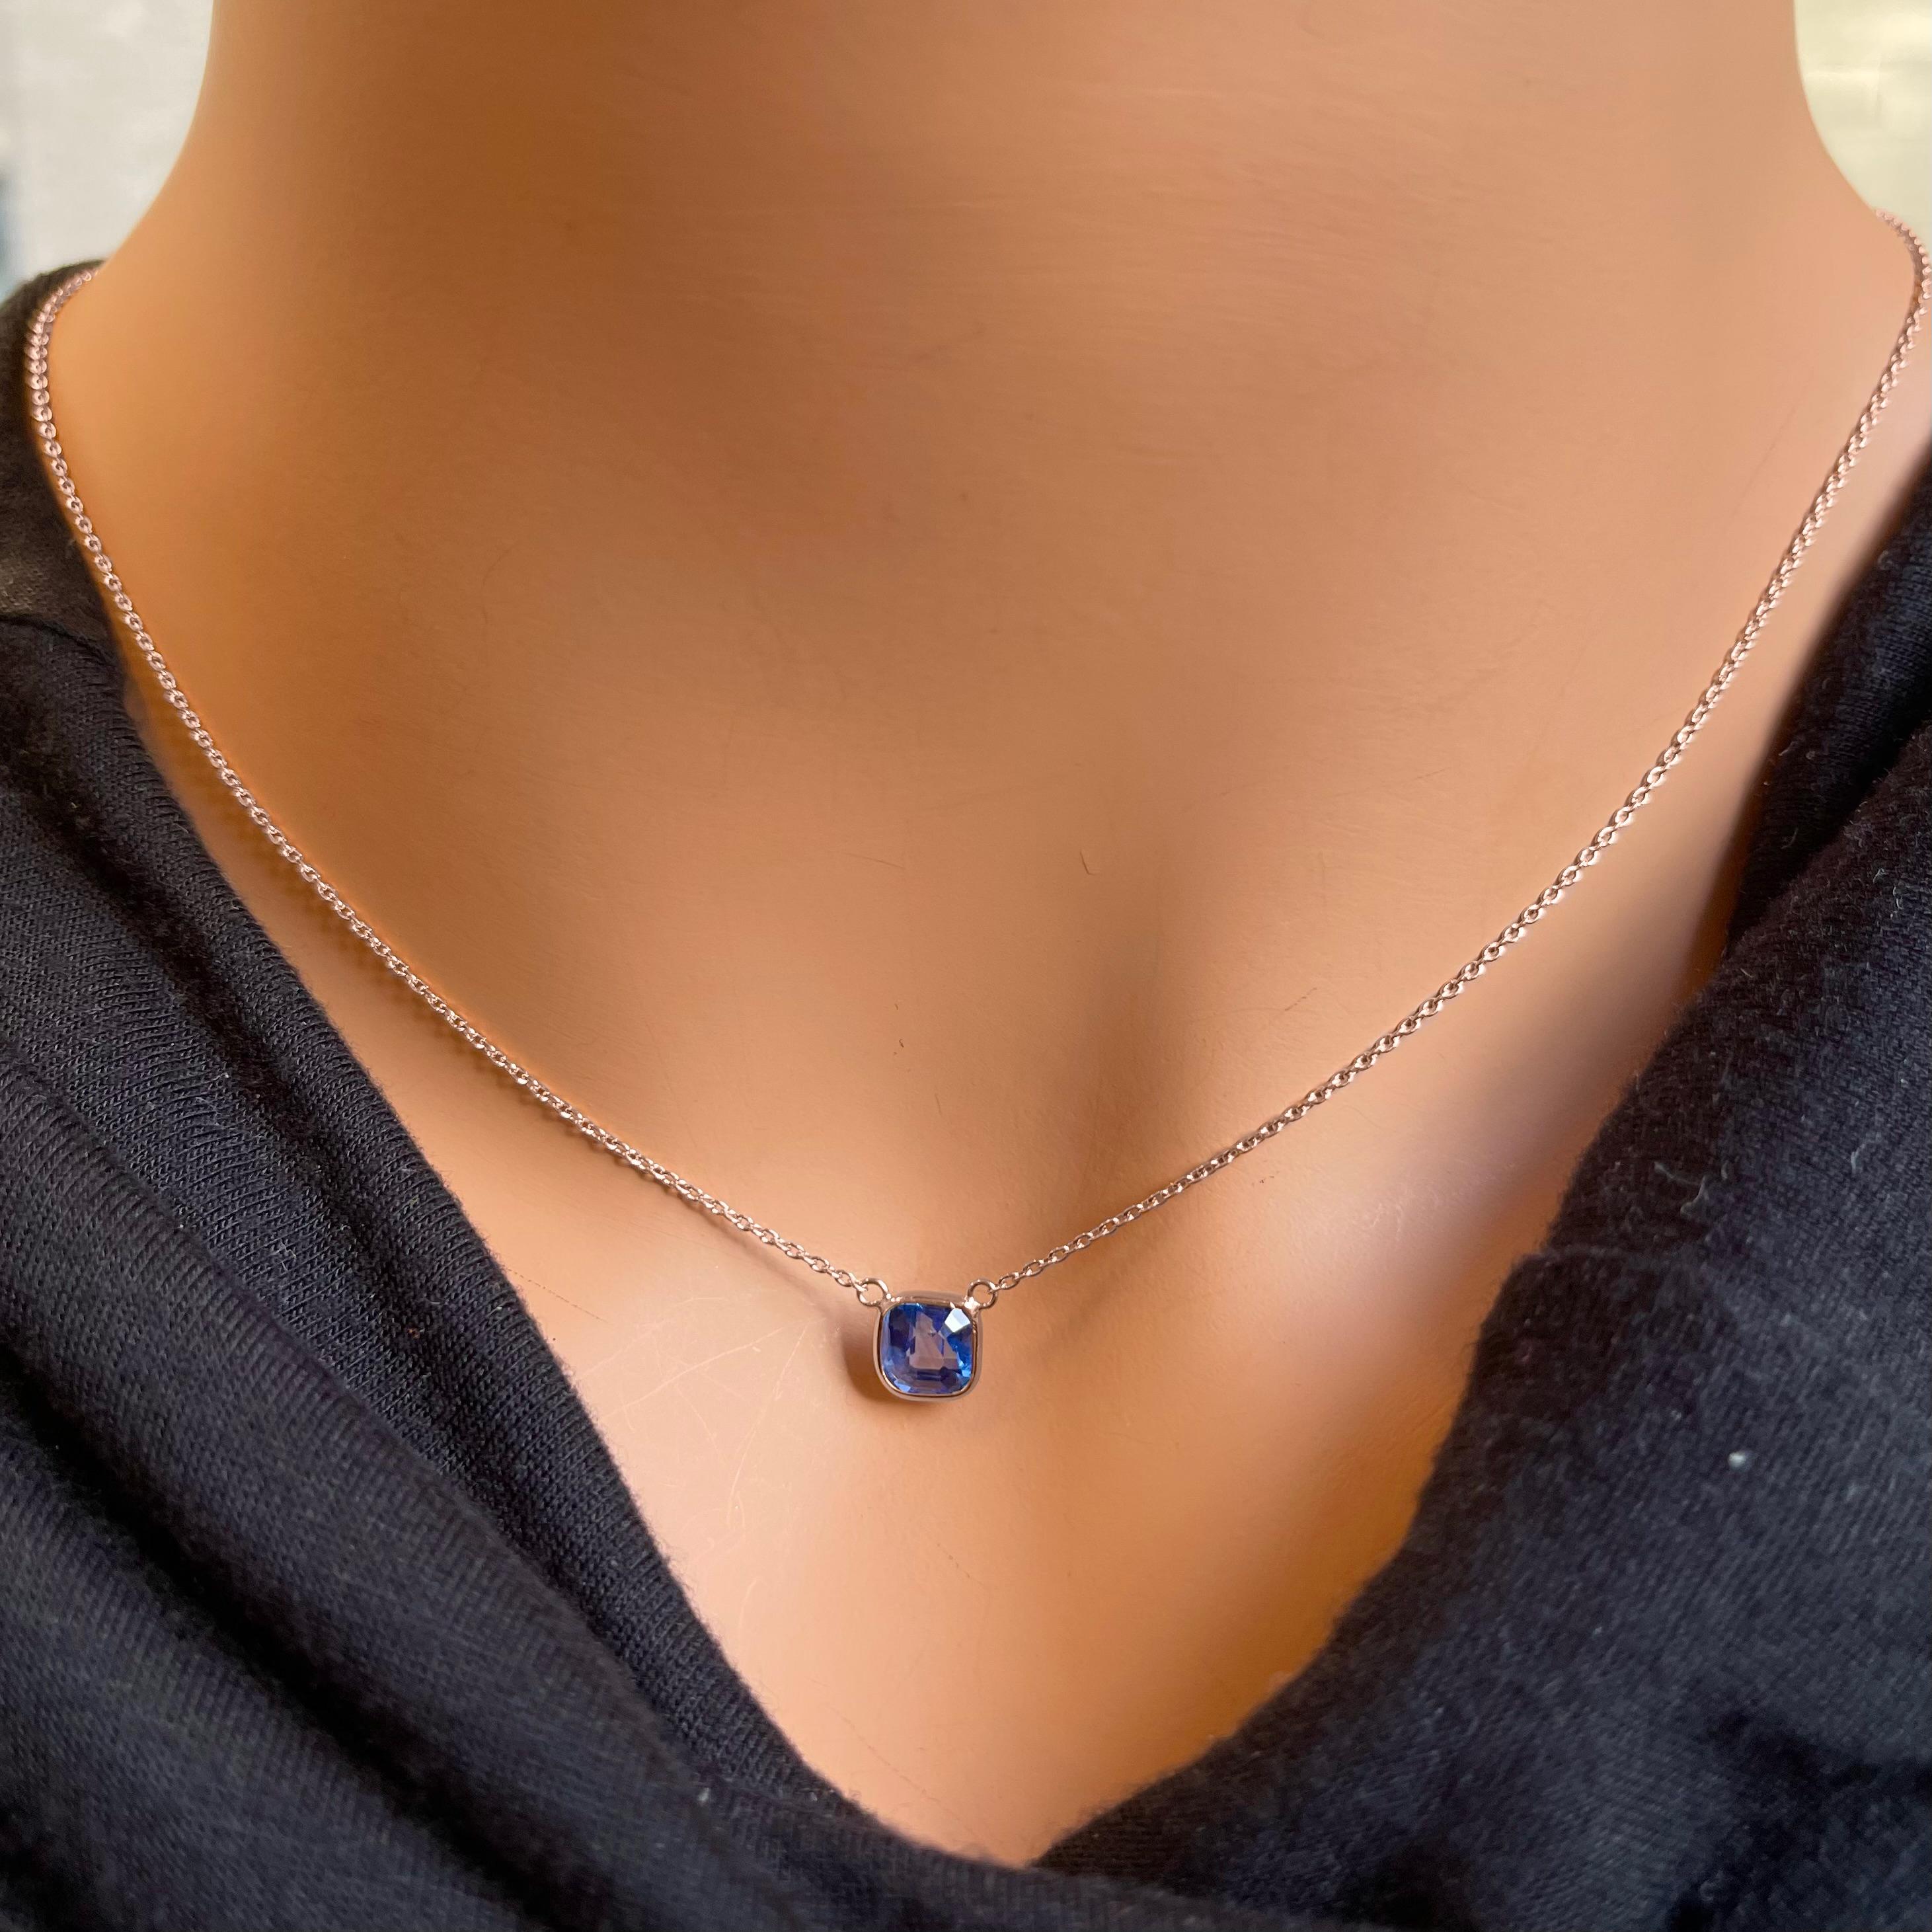 A fashion necklace made of 14k rose gold with a main stone of a certified blue Asscher-cut sapphire weighing 1.66 carats would be a stunning and sophisticated choice. Blue sapphires are known for their captivating and deep blue color, and the